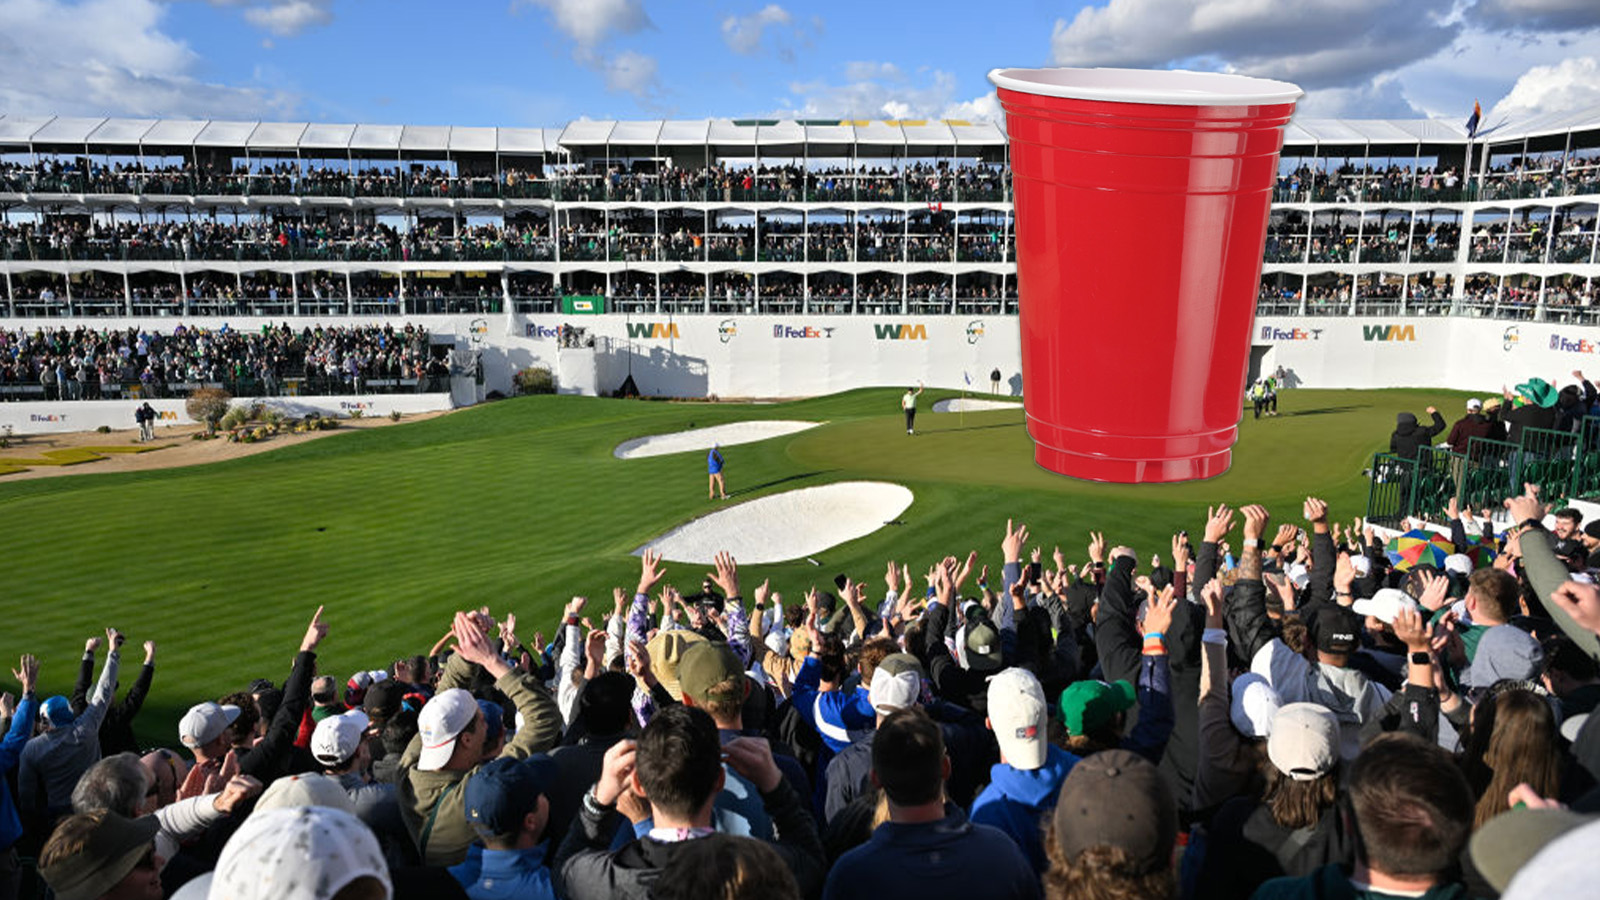 PGA Waste Management Bartender Reveals Why They Stopped Alcohol Sales